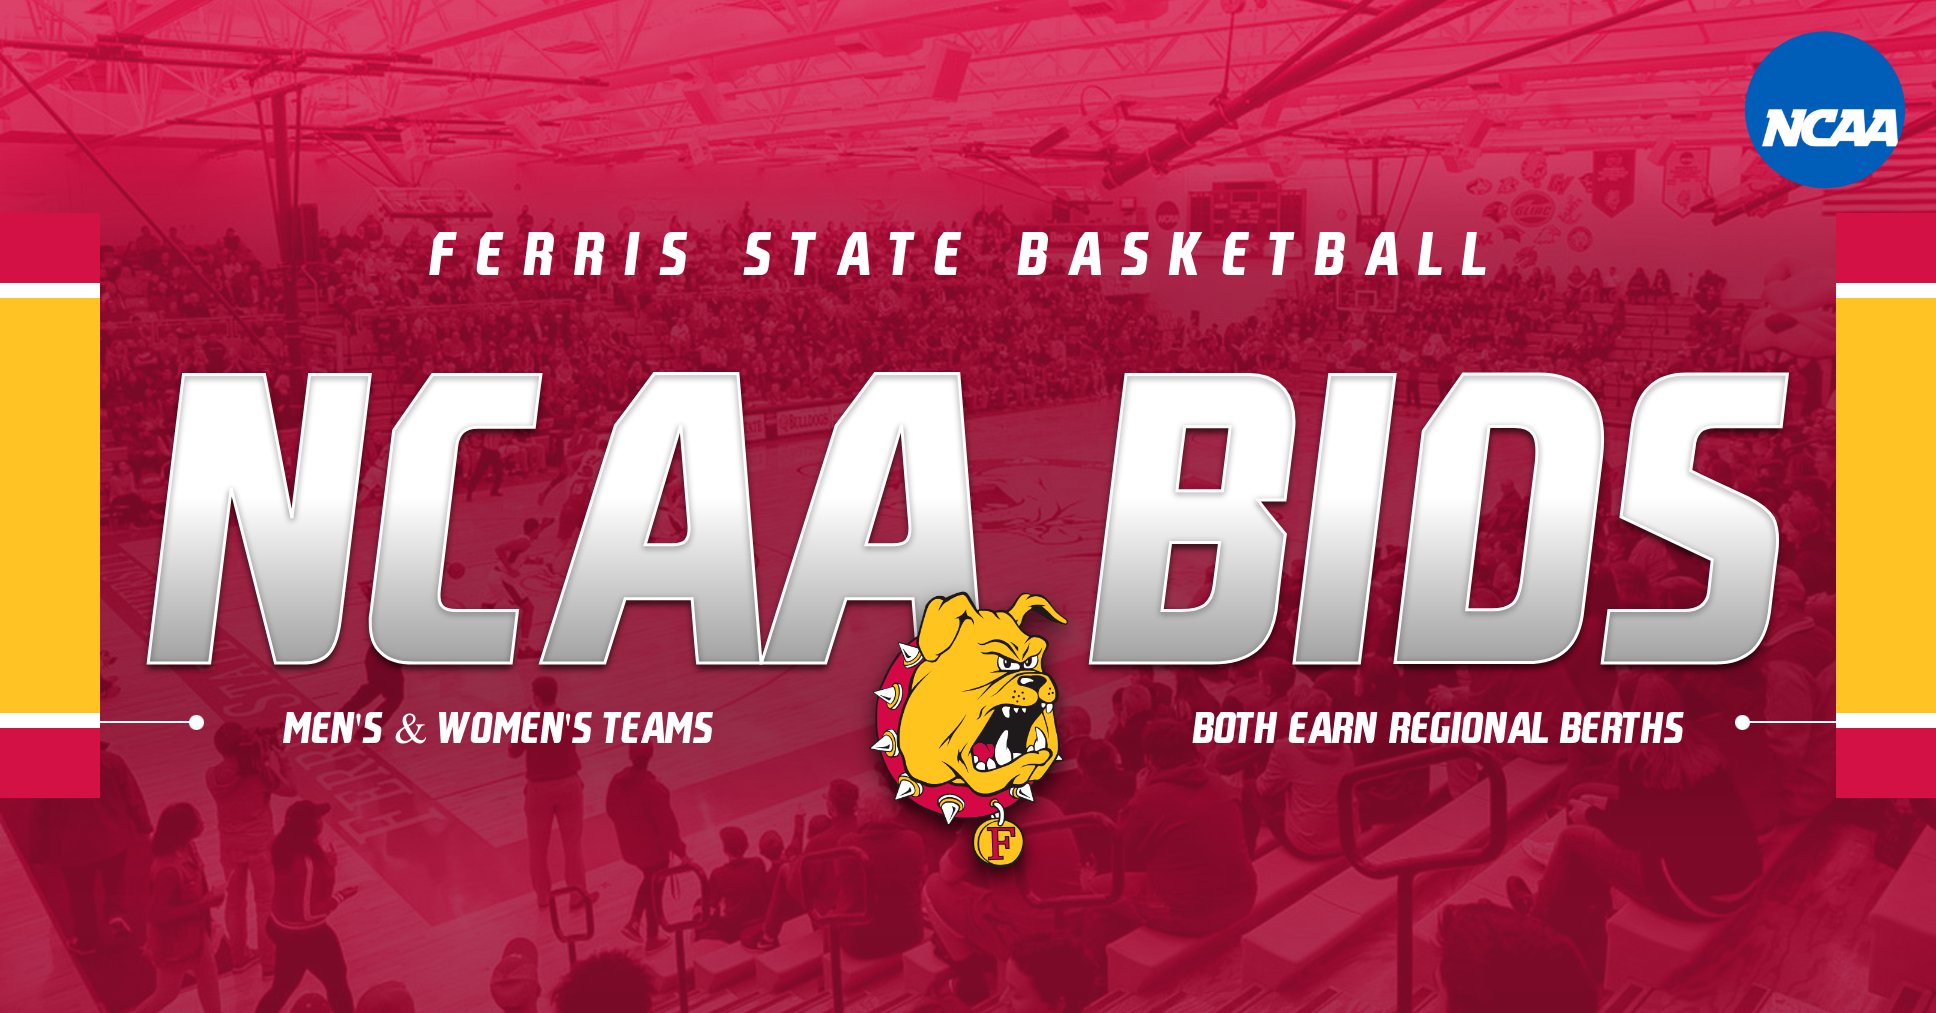 Ferris State Basketball Squads Both Earn NCAA Tourney Berths In Same Year For First Time In School History